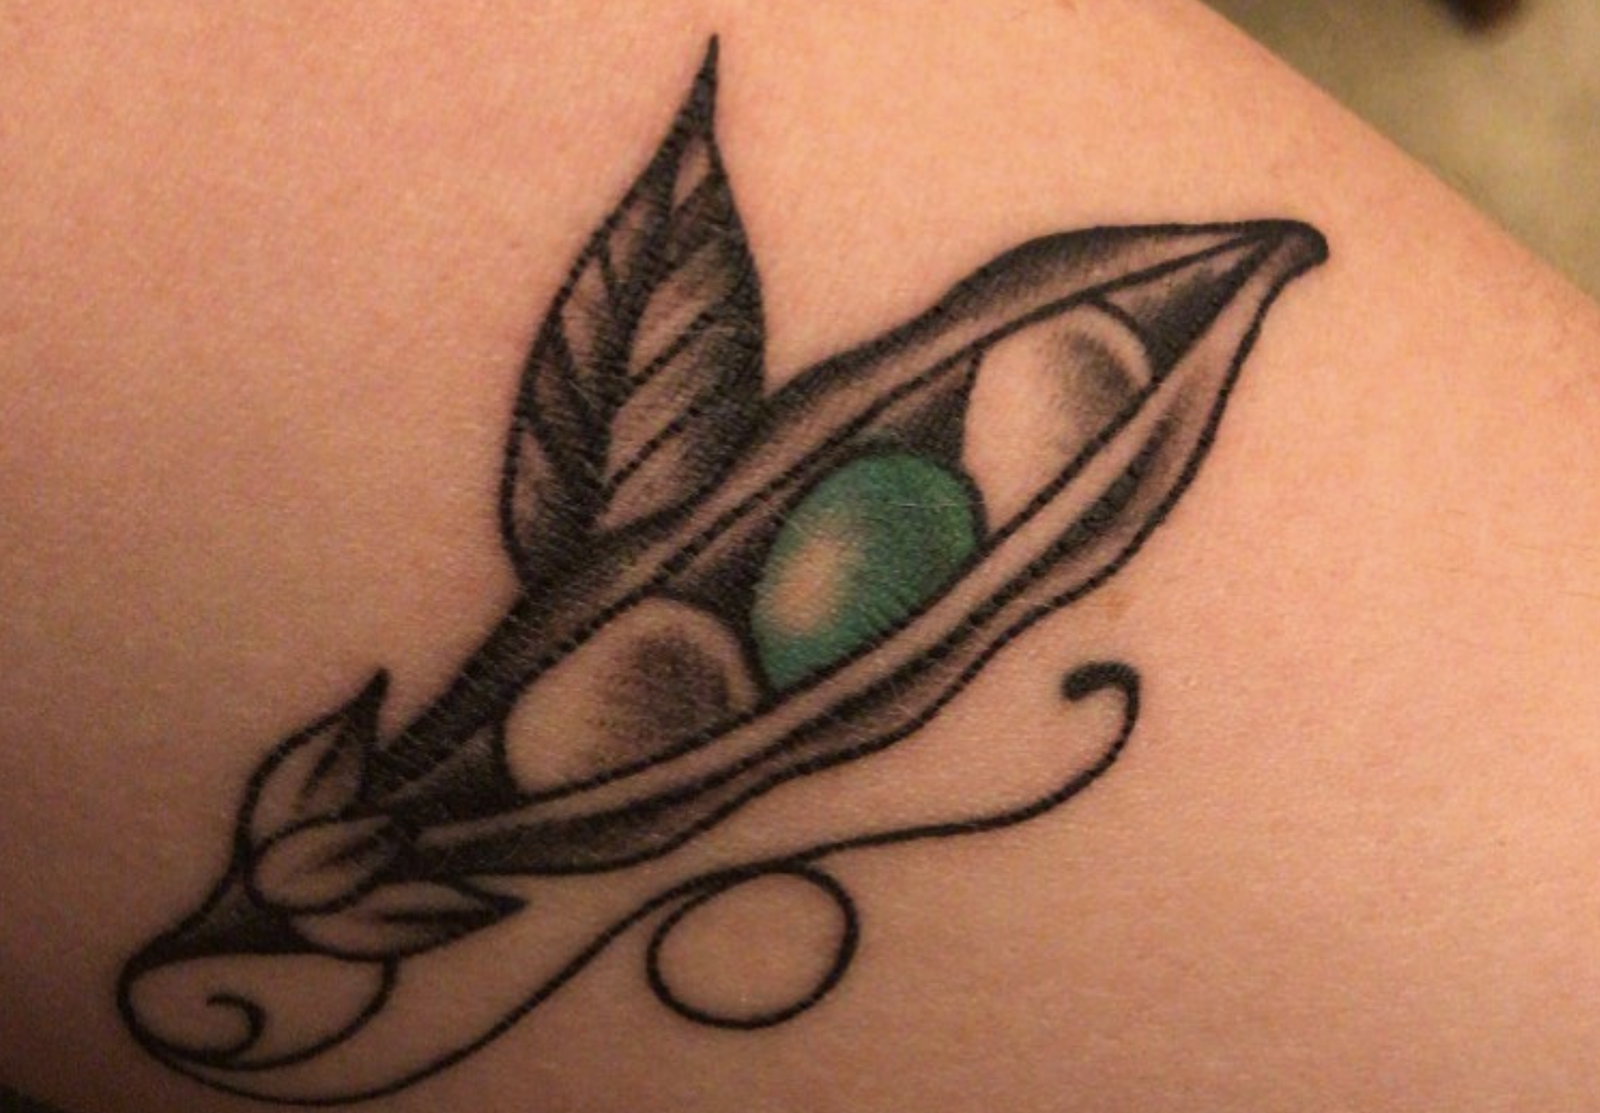 Miscarriage Tattoo Pea in a Pod